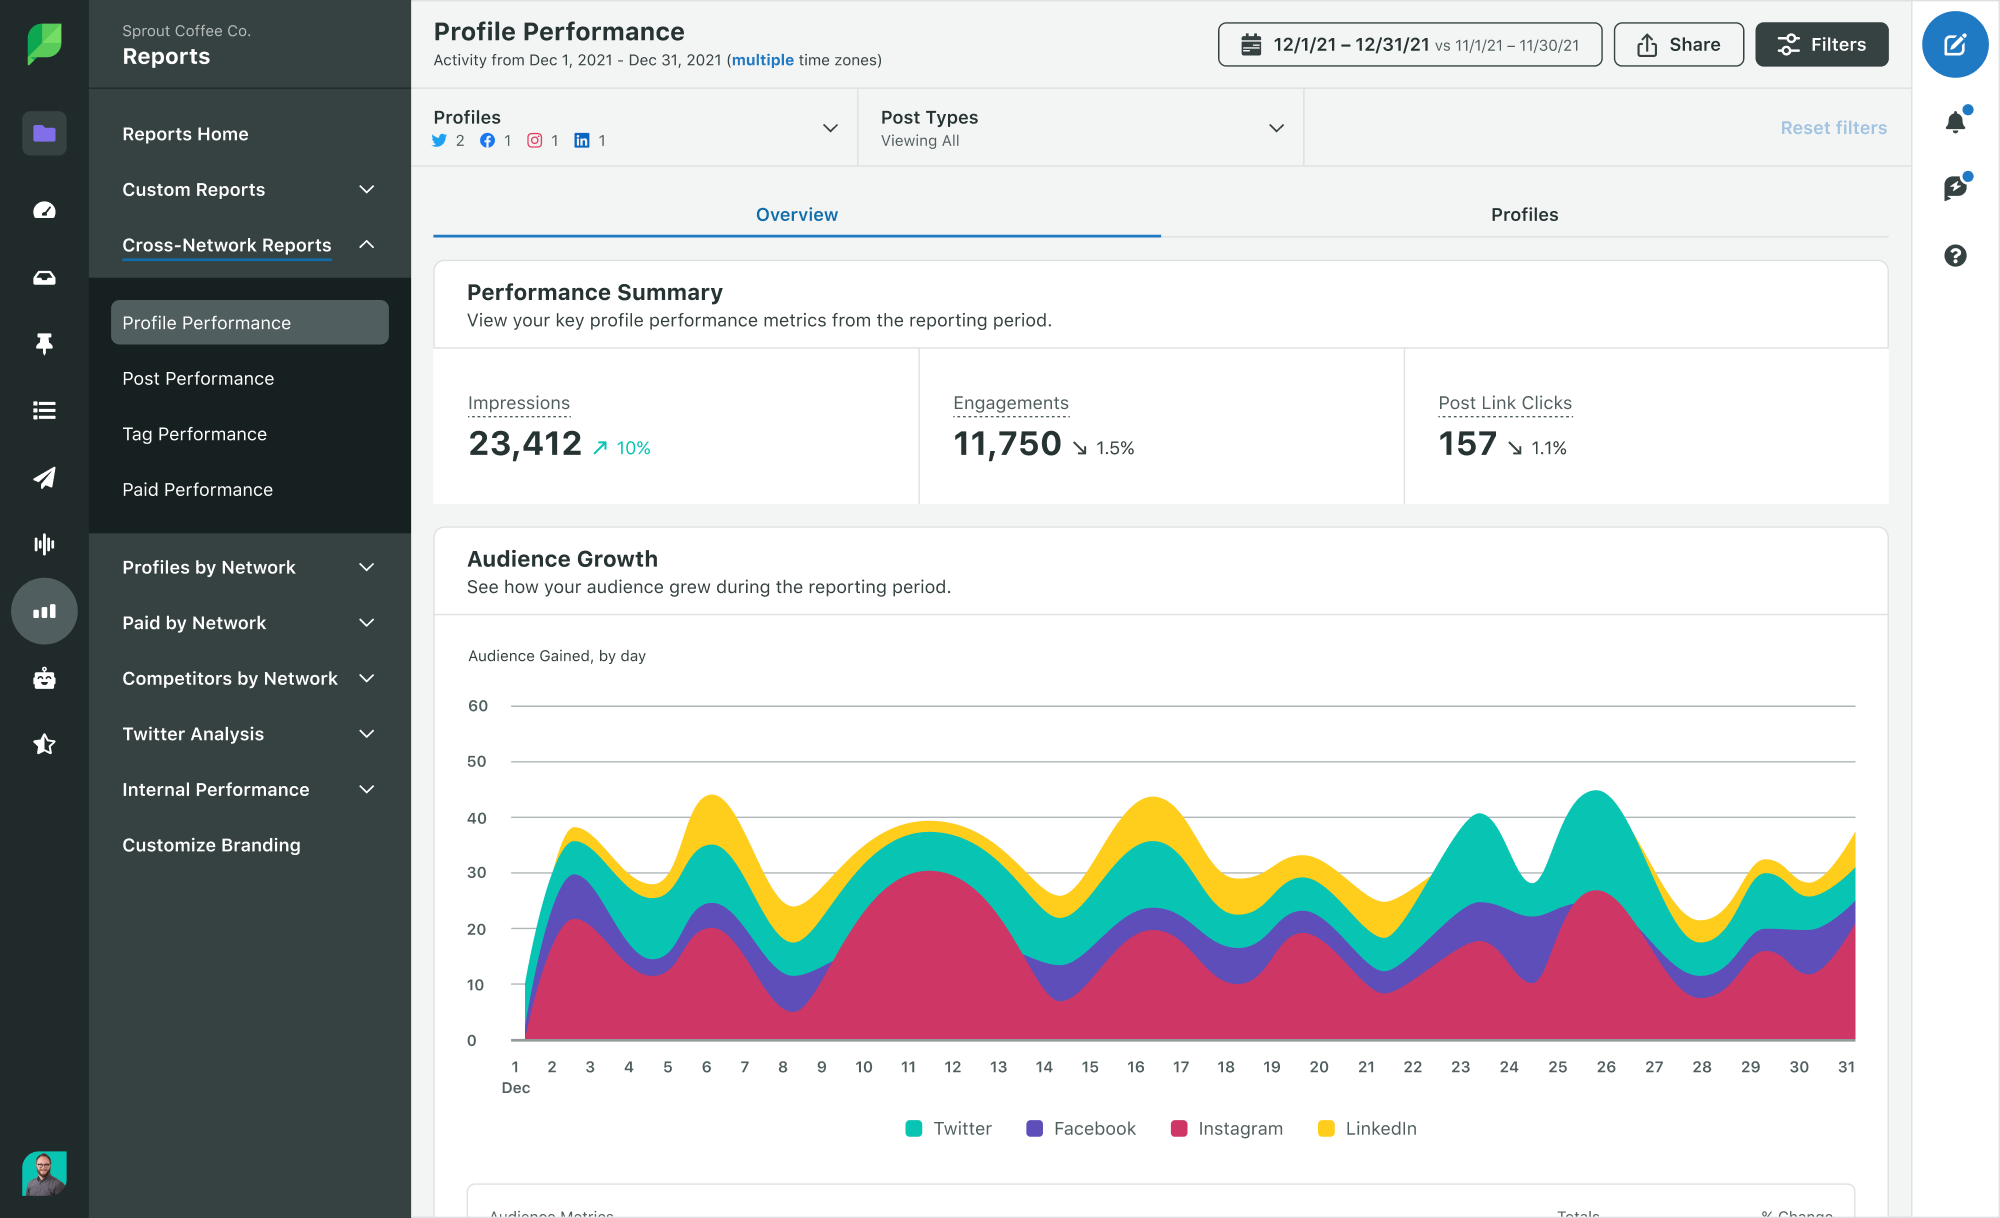 Preview of Sprout’s Profile Performance dashboard showing profiles and post types.